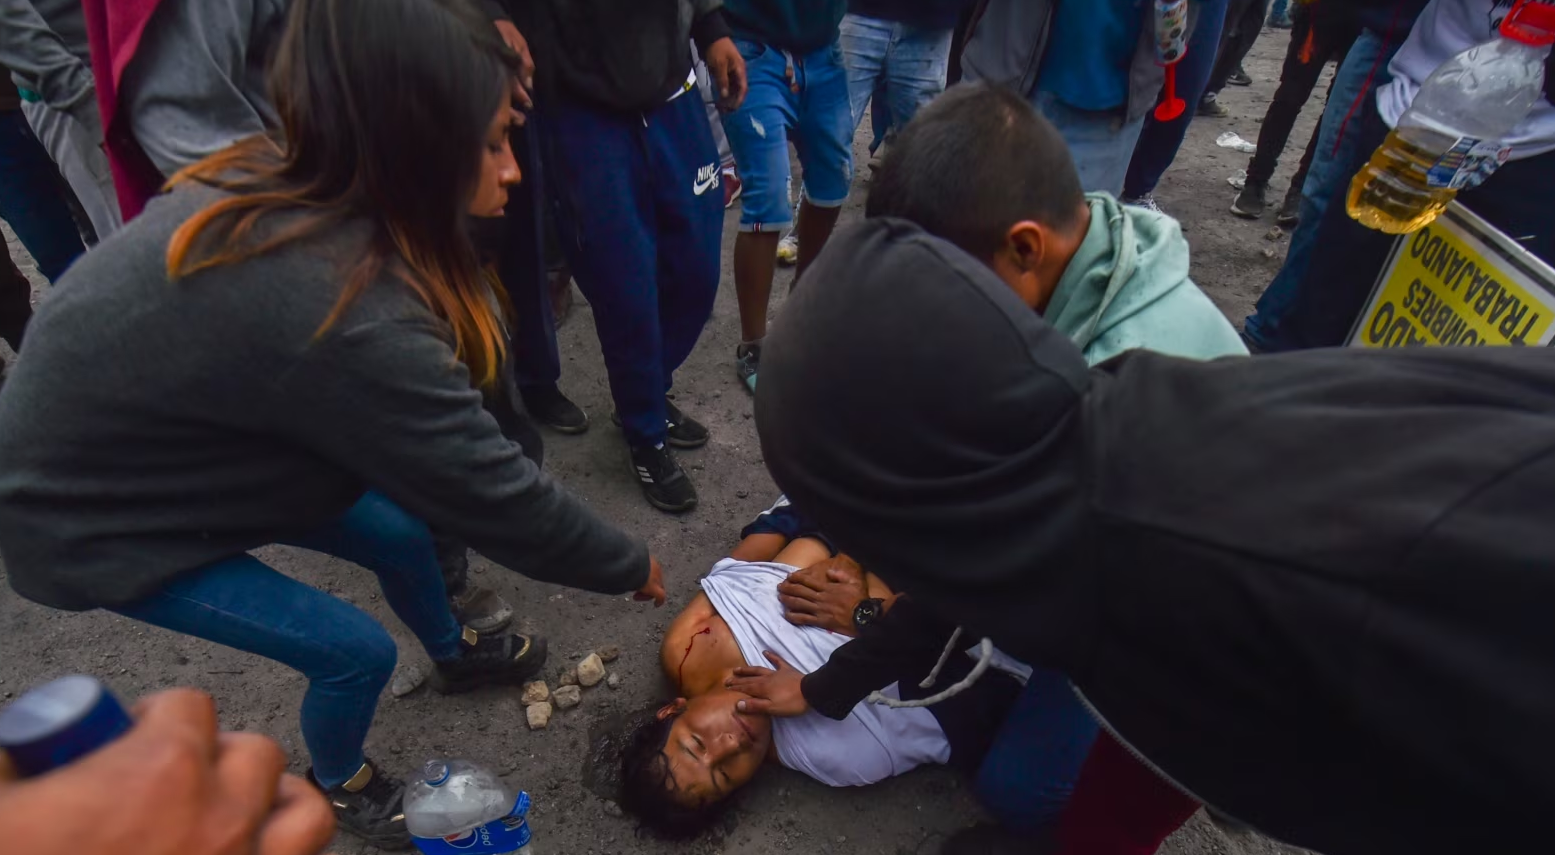 UN says Peru resorted to excessive use of force in protests that left more than 60 people dead